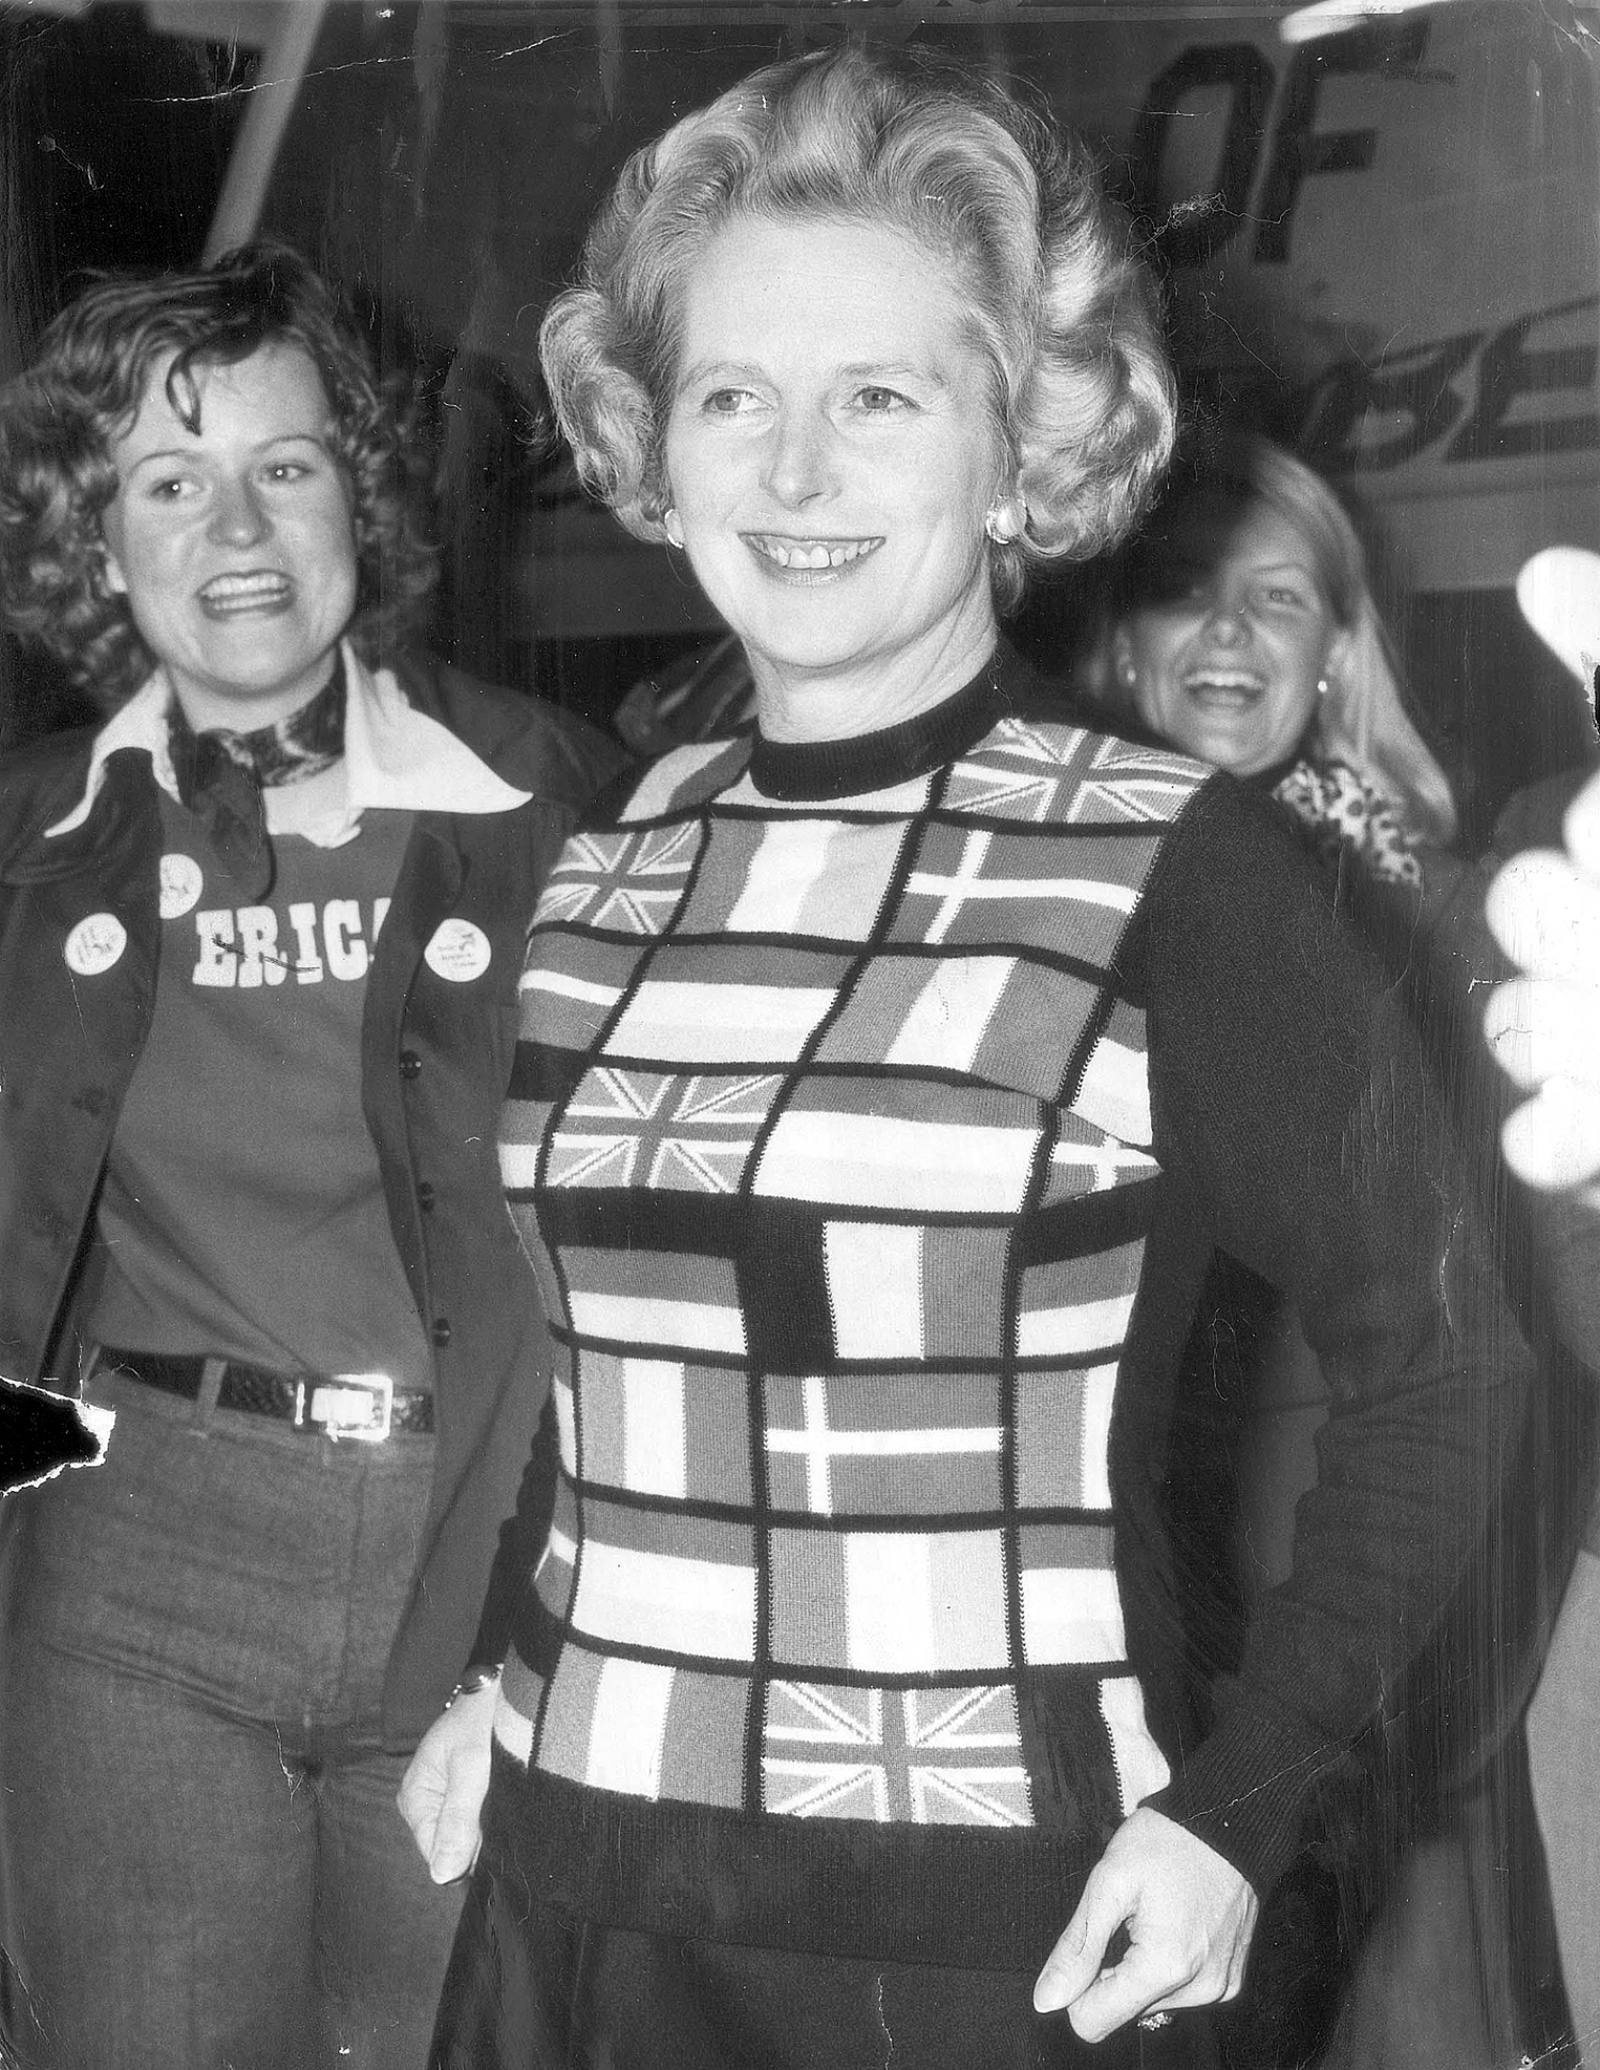 Margaret Thatcher, the new leader of the Conservative Party, campaigning for England to remain part of the European Economic Community, June 1975